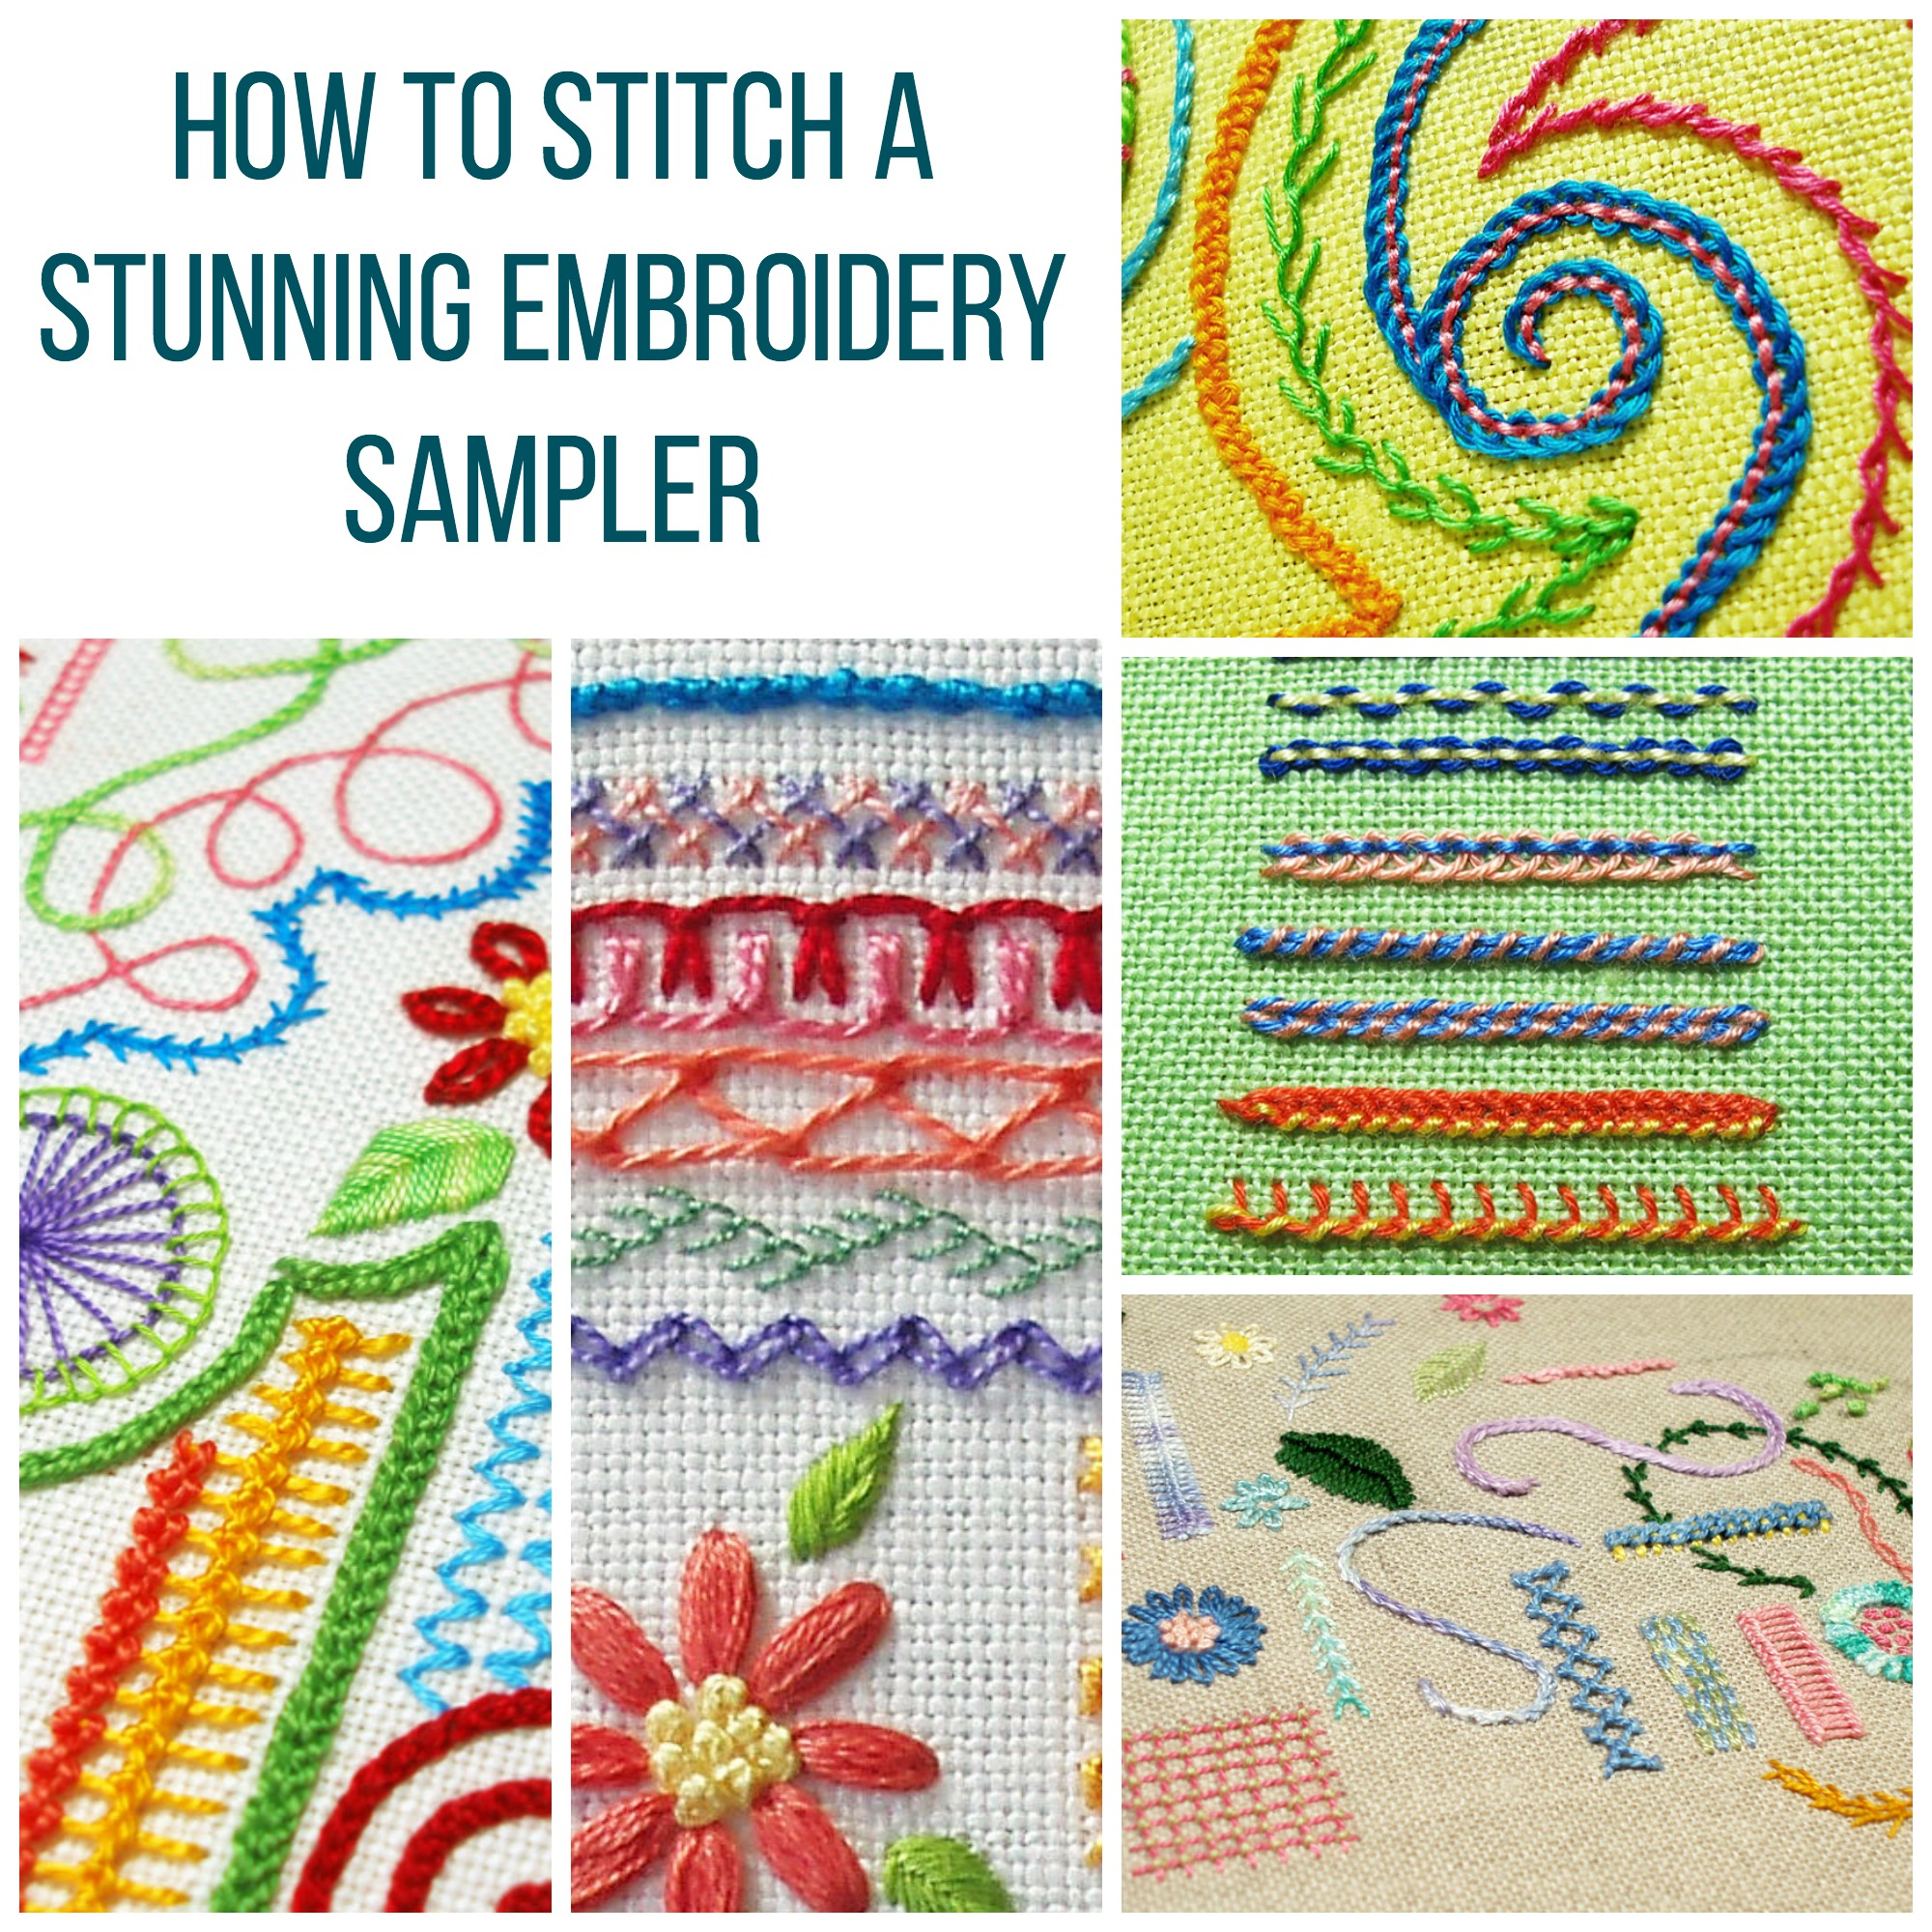 Hand Embroidery Sampler Patterns Show Off Your Stitching With A Stunning Embroidery Sampler